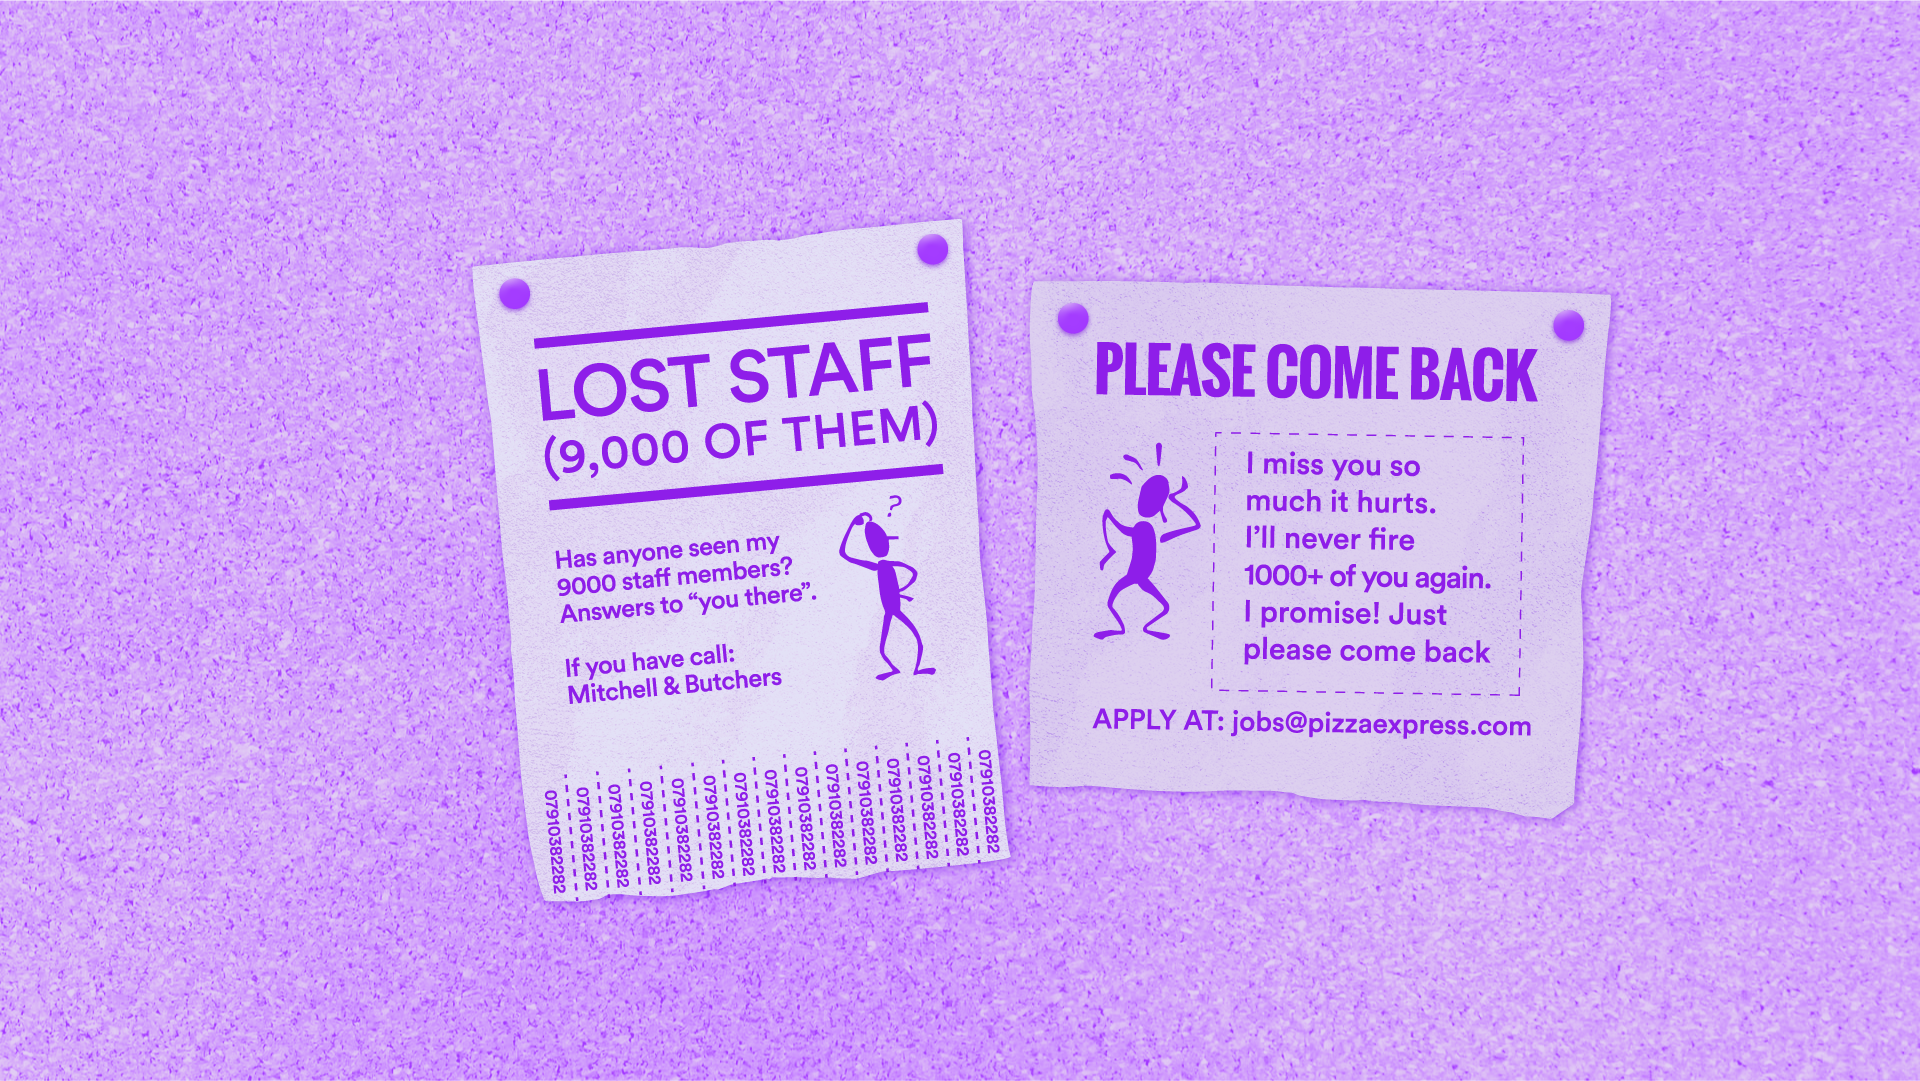 Hard to hire in hospitality - lost staff